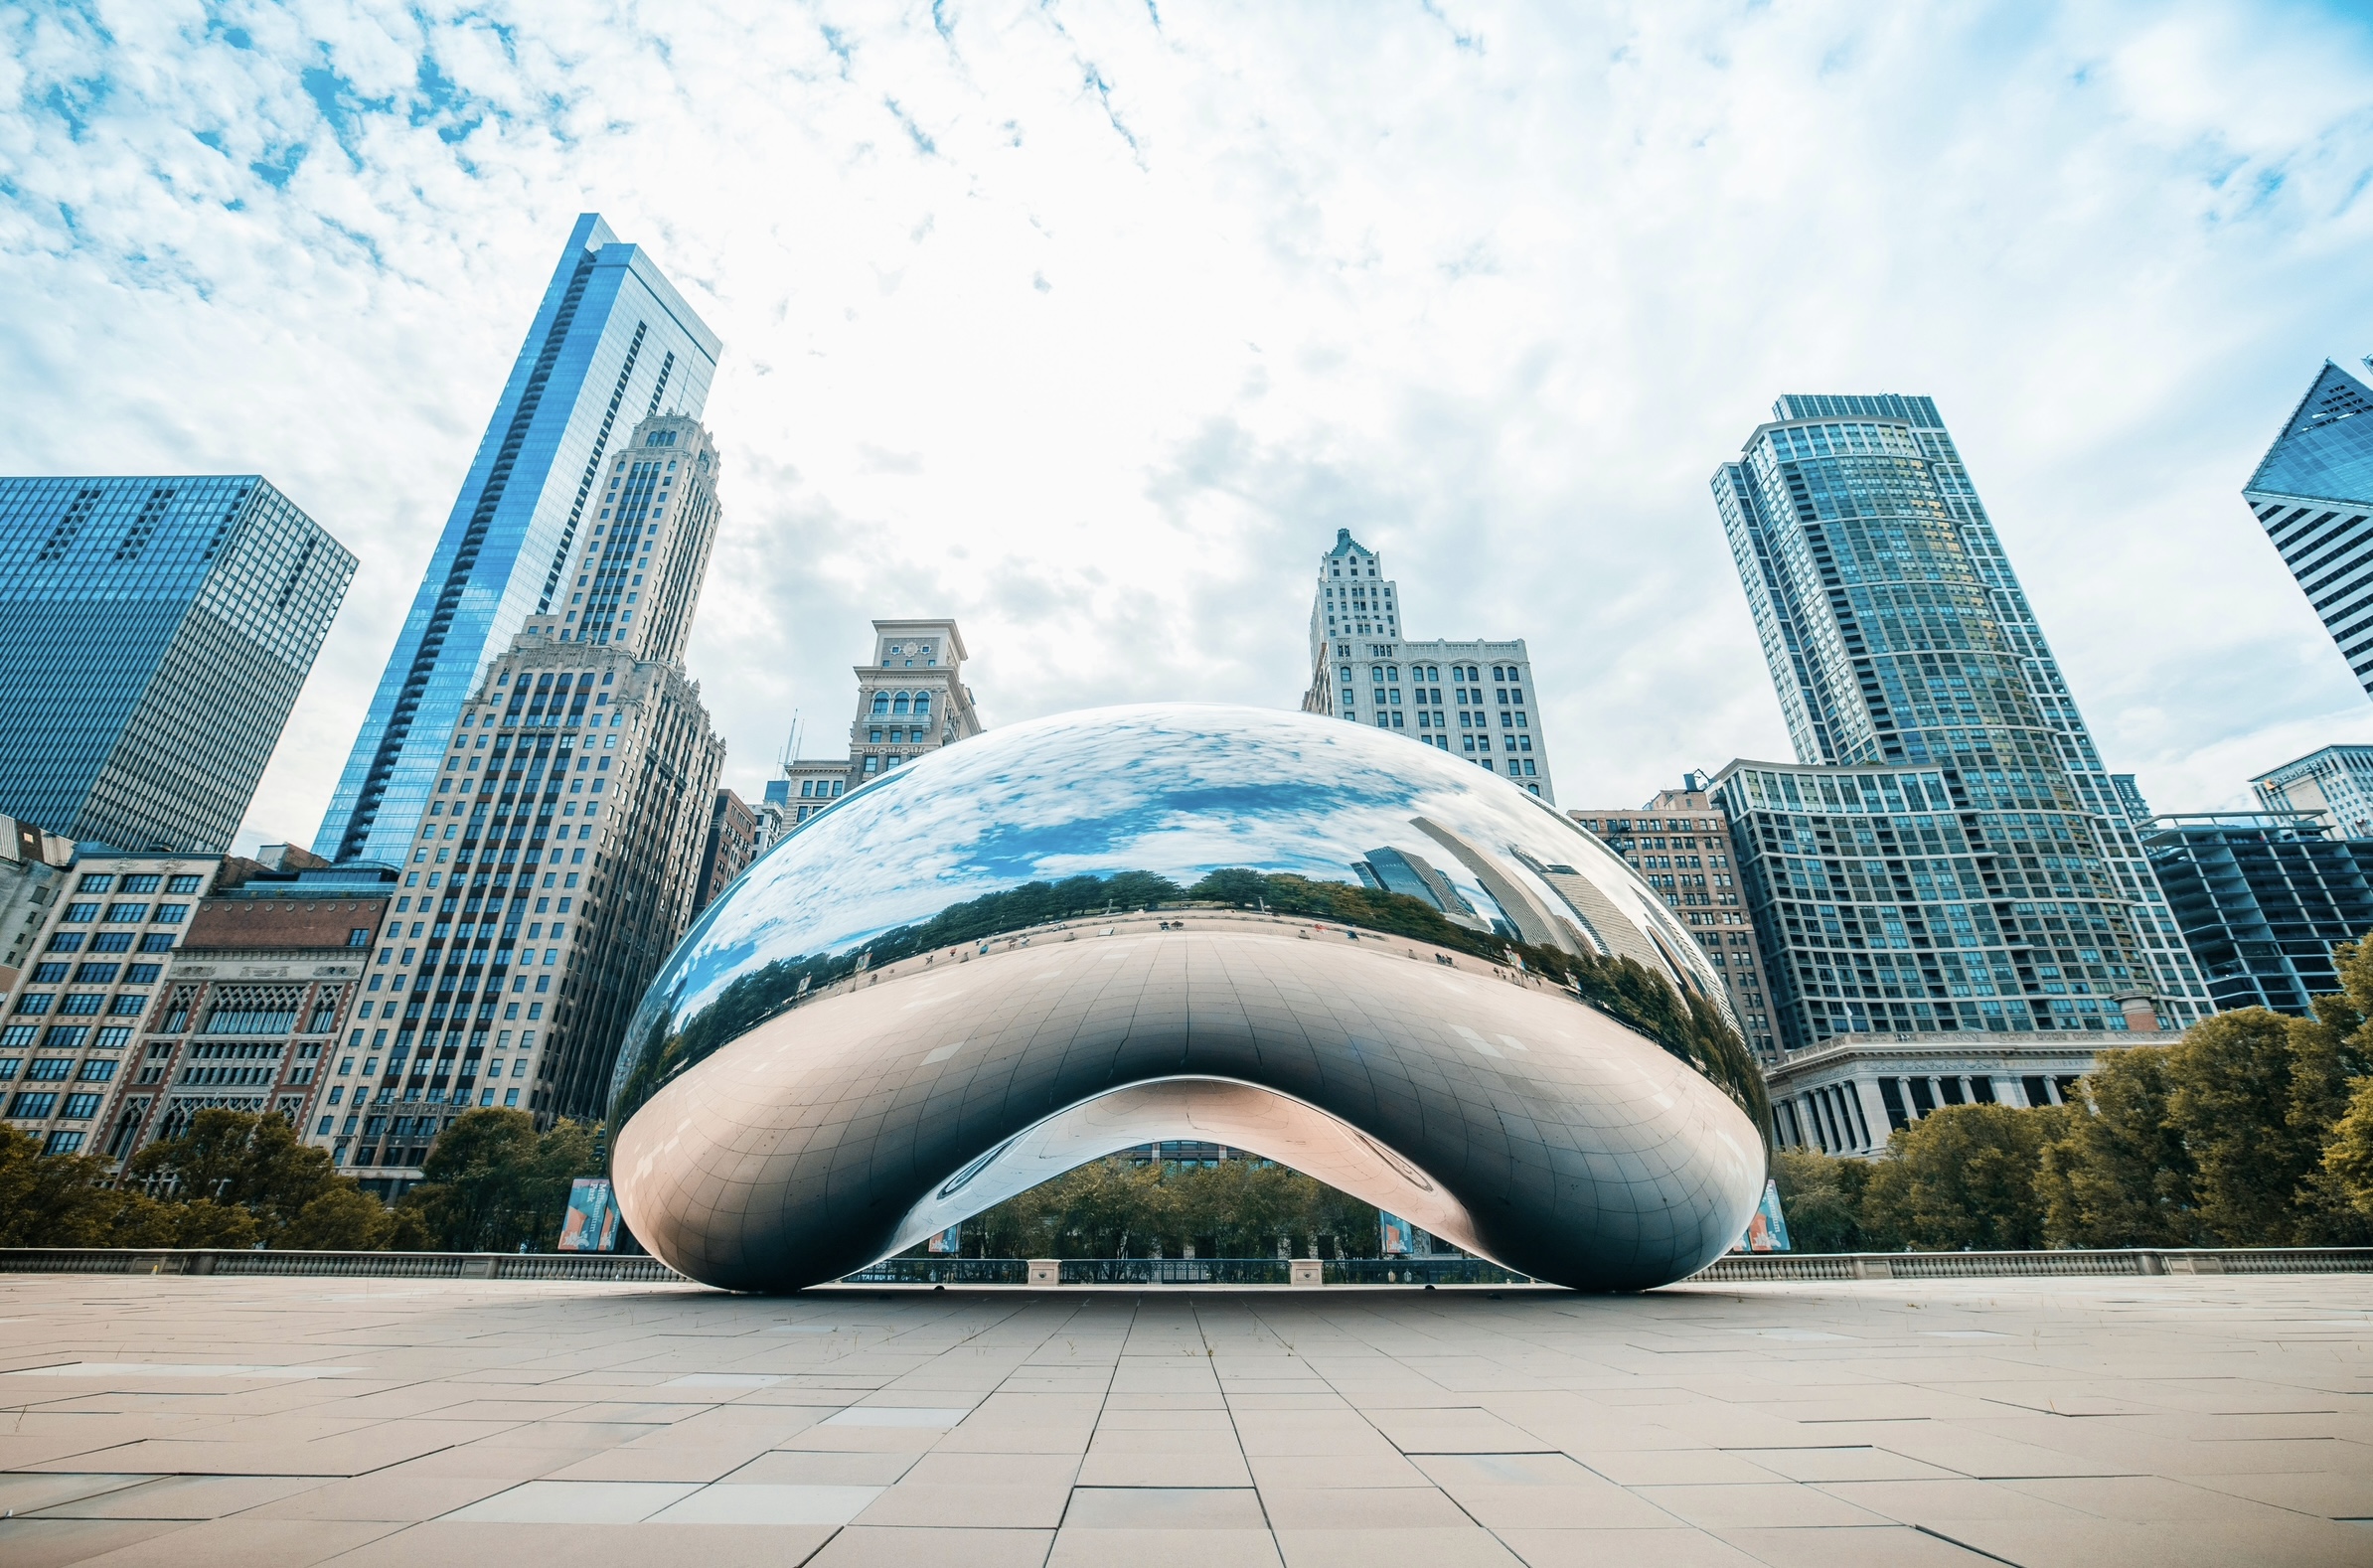 Chicago is a big filming location for the new Tyler Perry film “Mea Culpa”.
Pictured: the Chicago Cloud Gate or “The Bean” on a cloudy bright day 